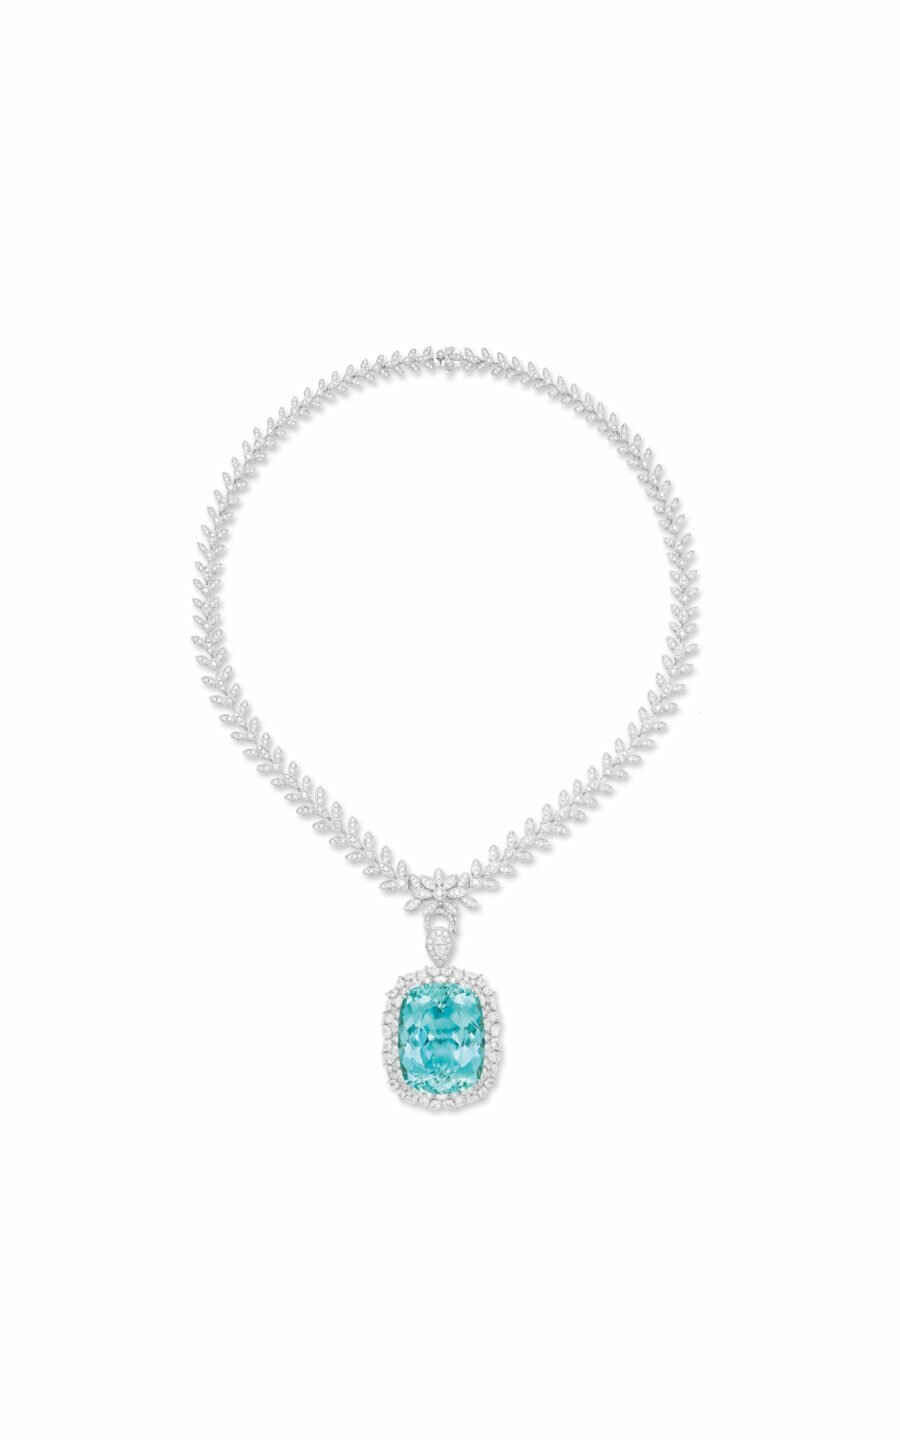 Diamond Necklace With Rare Unheated Mozambican Paraiba Tourmaline Goes On Sale At Tiancheng International Jewellery And Jadeite Autumn Auction 2021